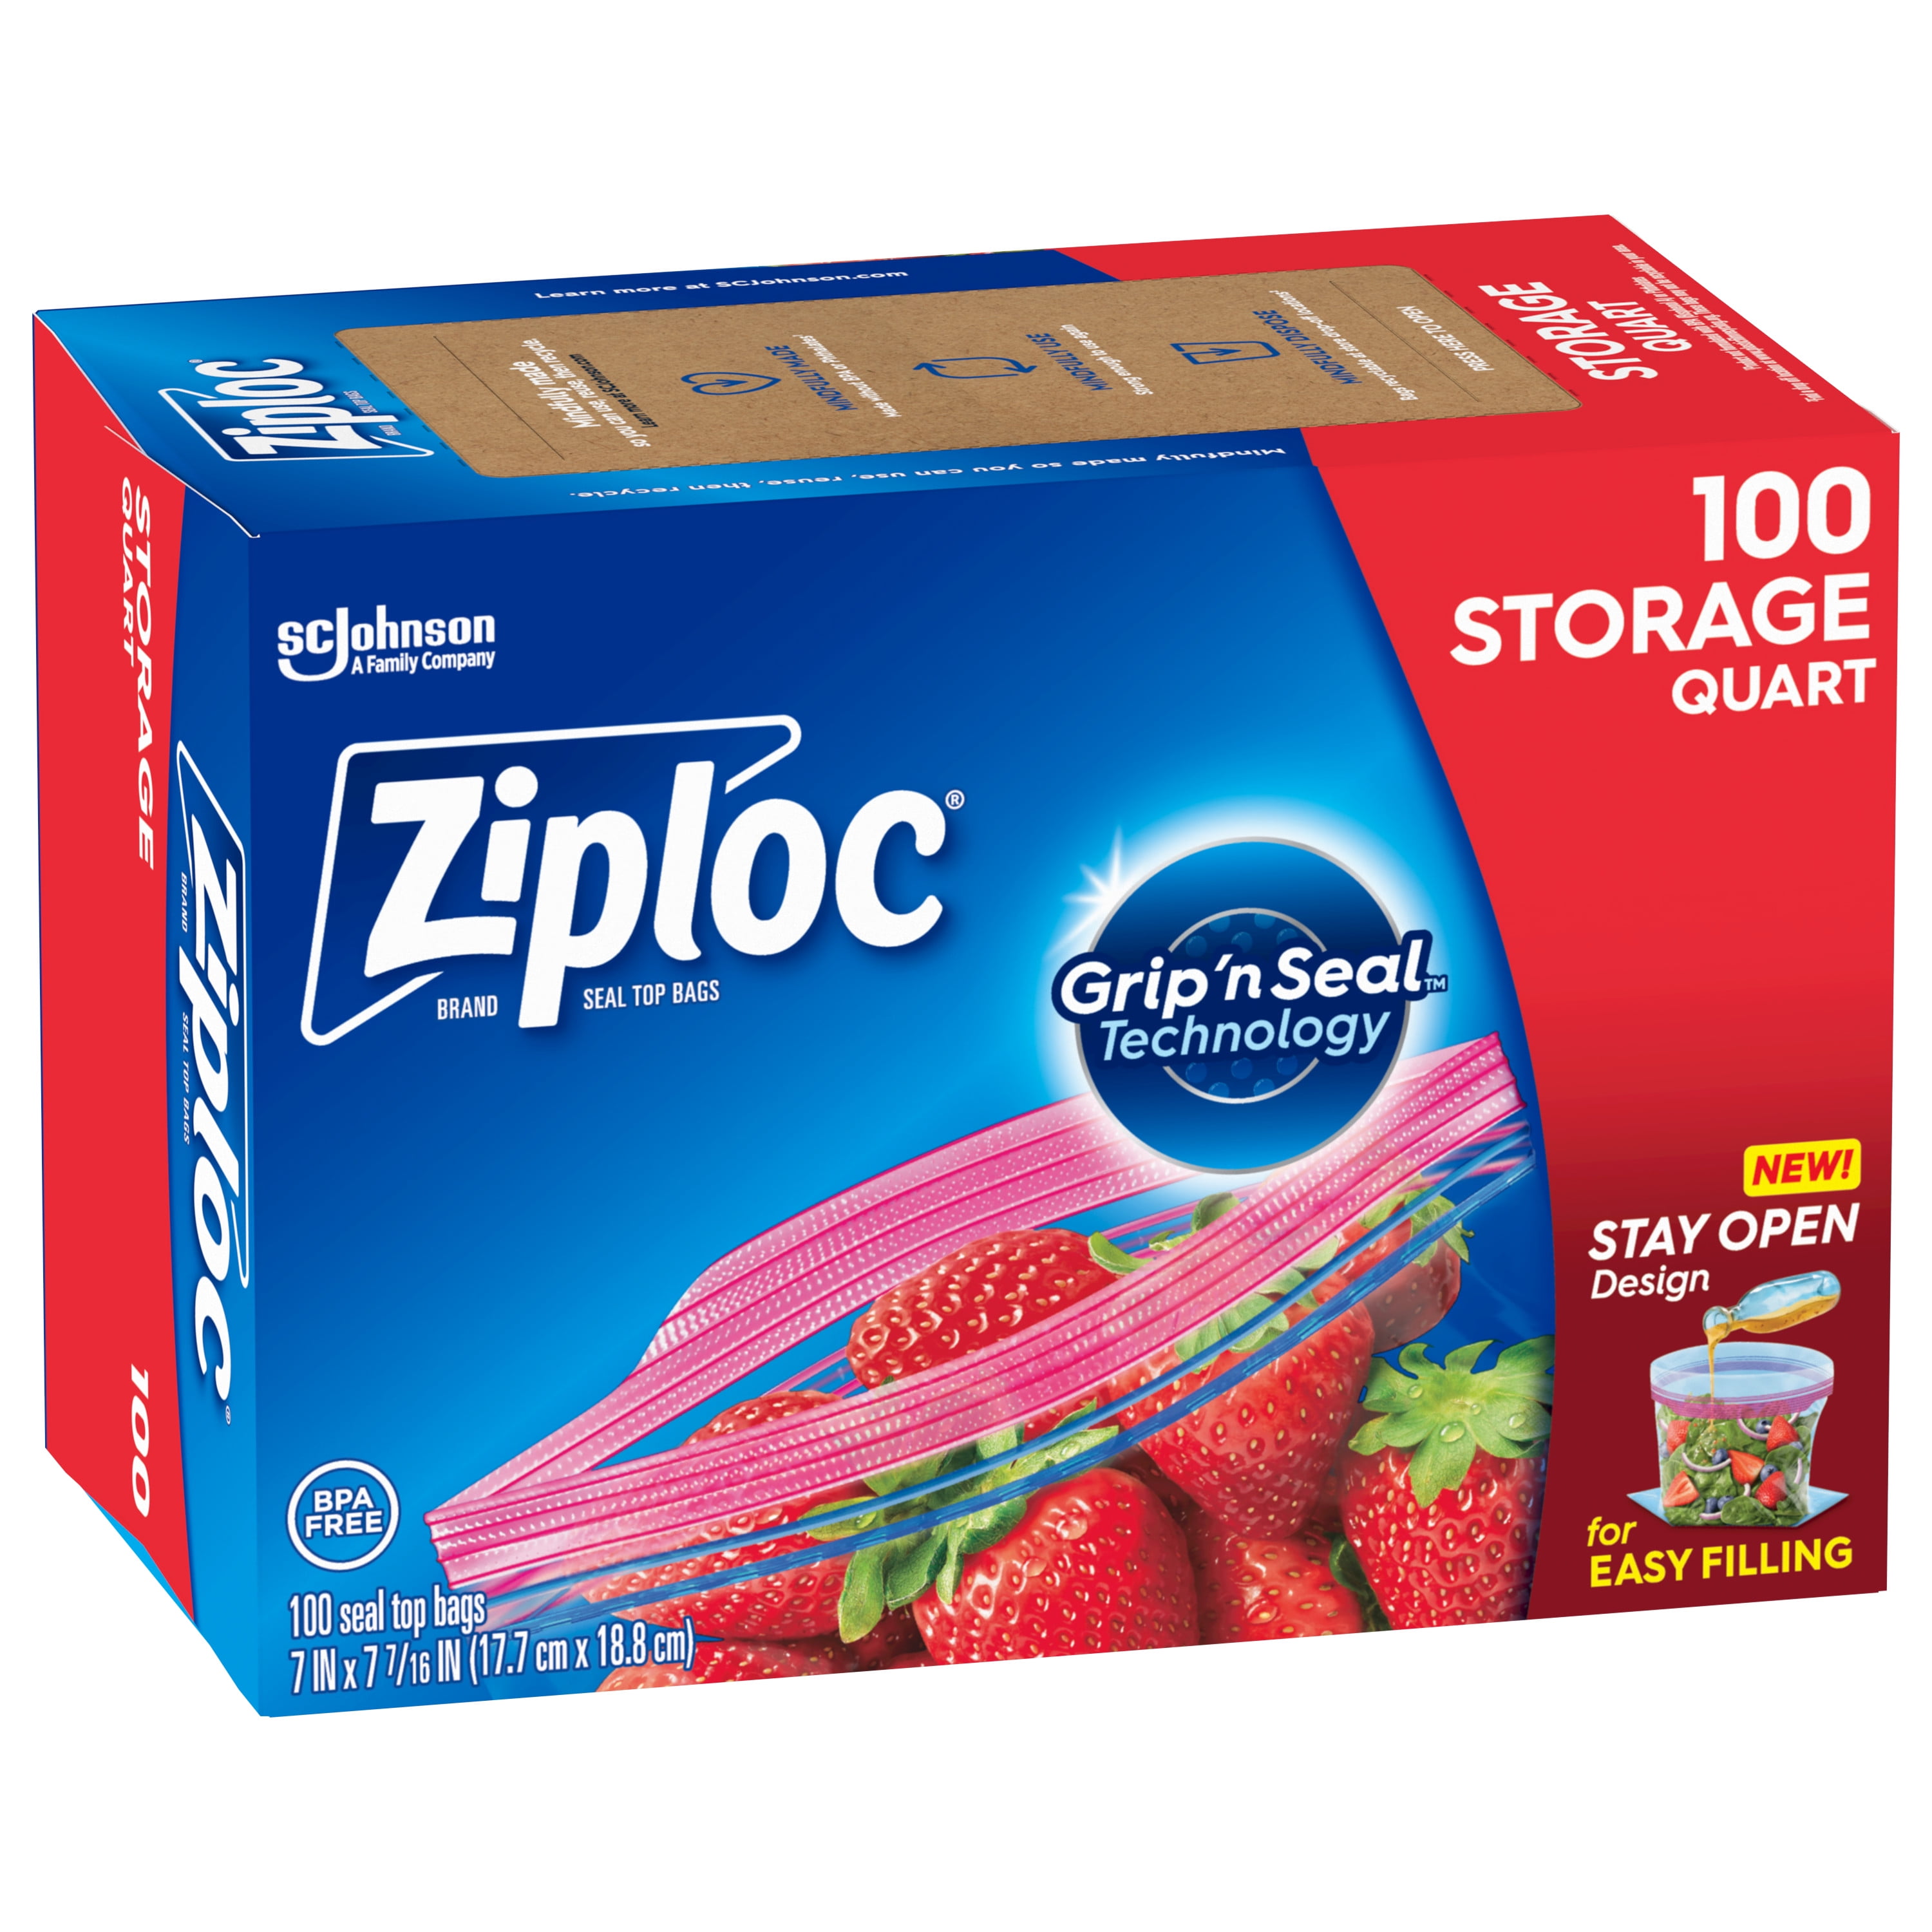 Ziploc Introduces A New Feature On Their Bags